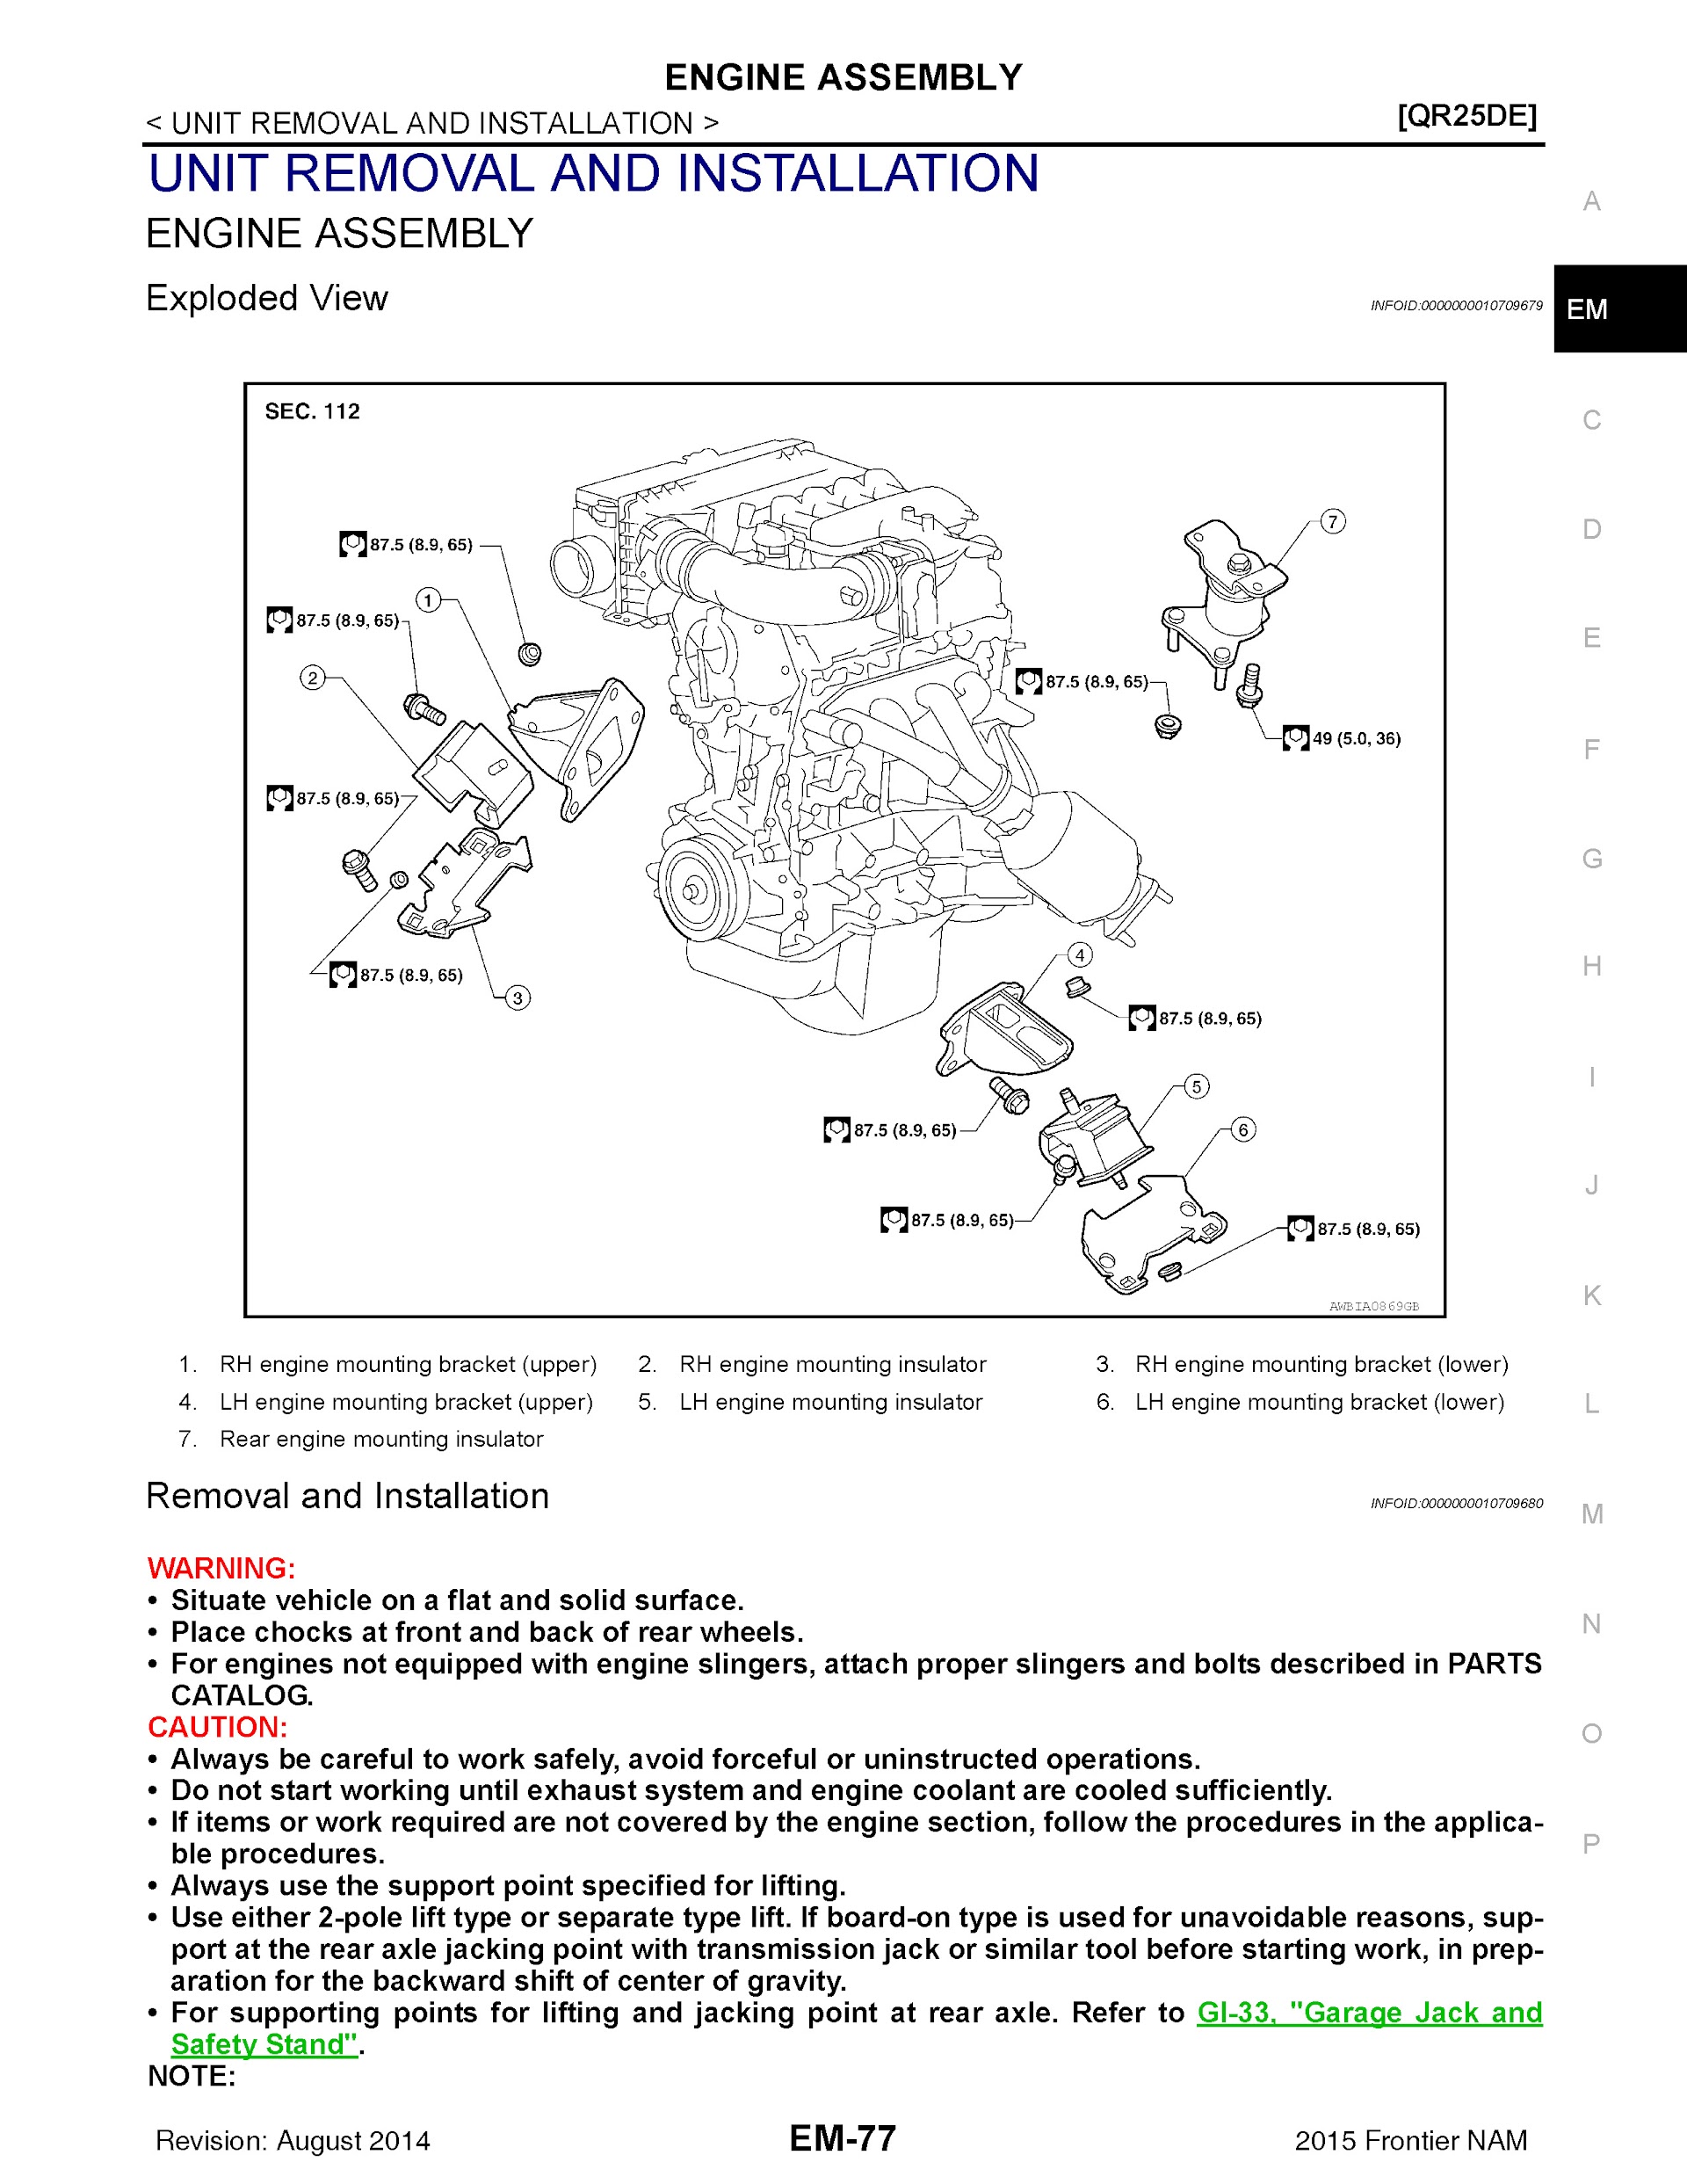 2015 Nissan Frontier Repair Manual, Engine Assembly